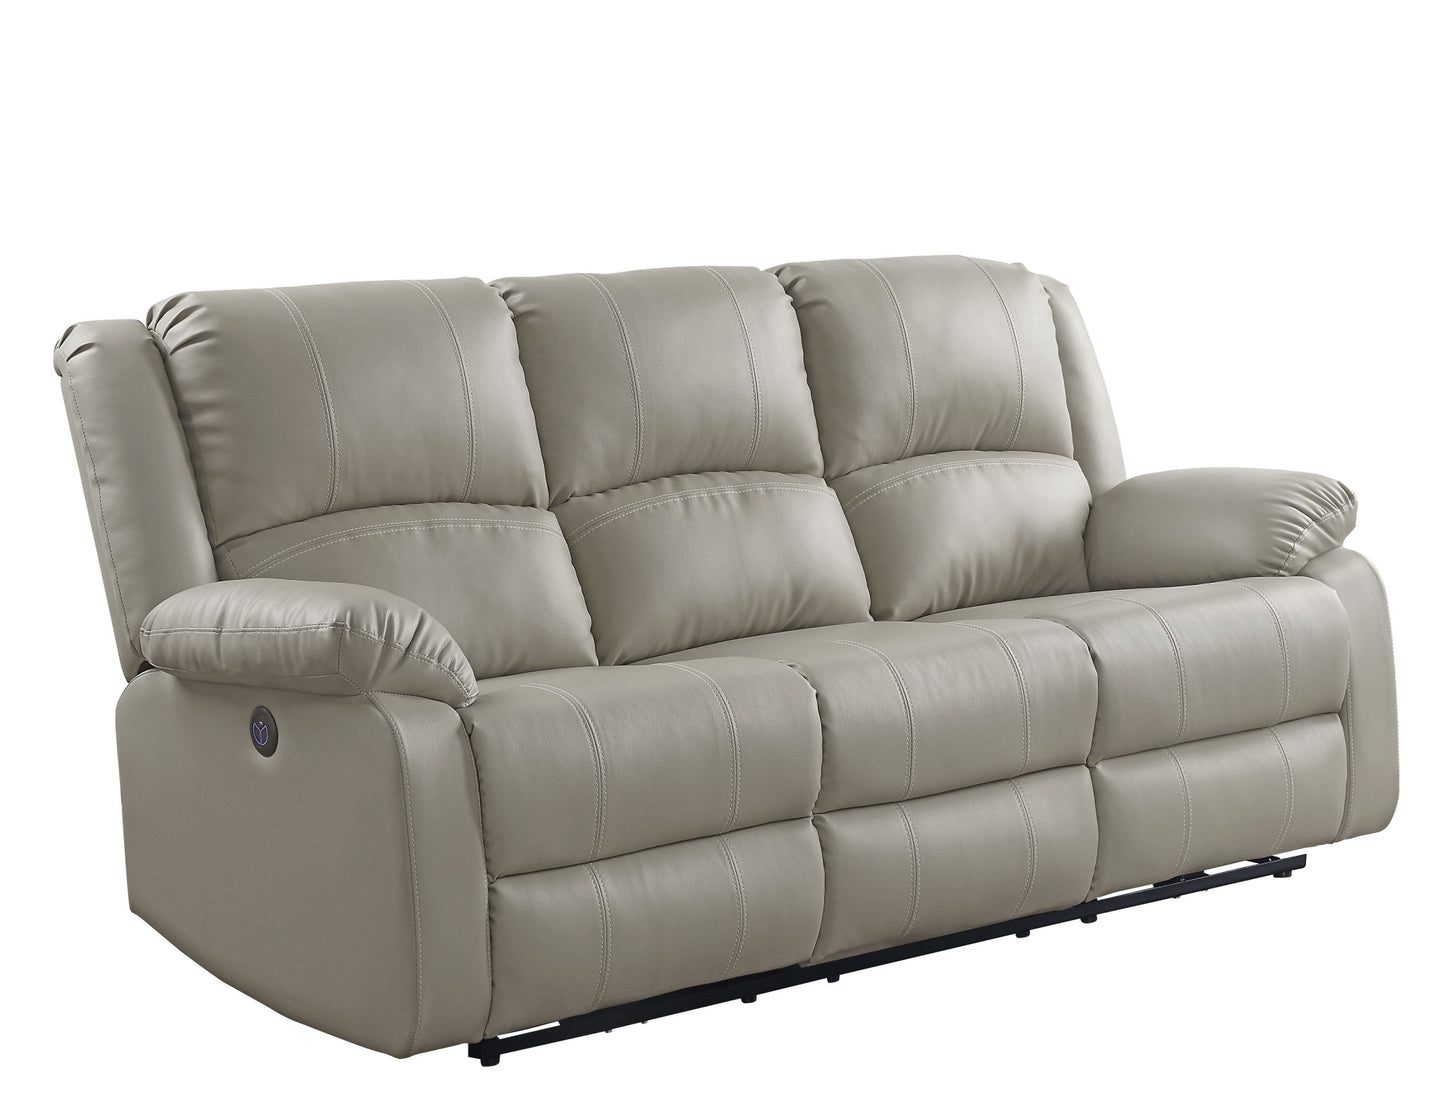 81" Beige And Black Faux Leather Reclining USB Sofa